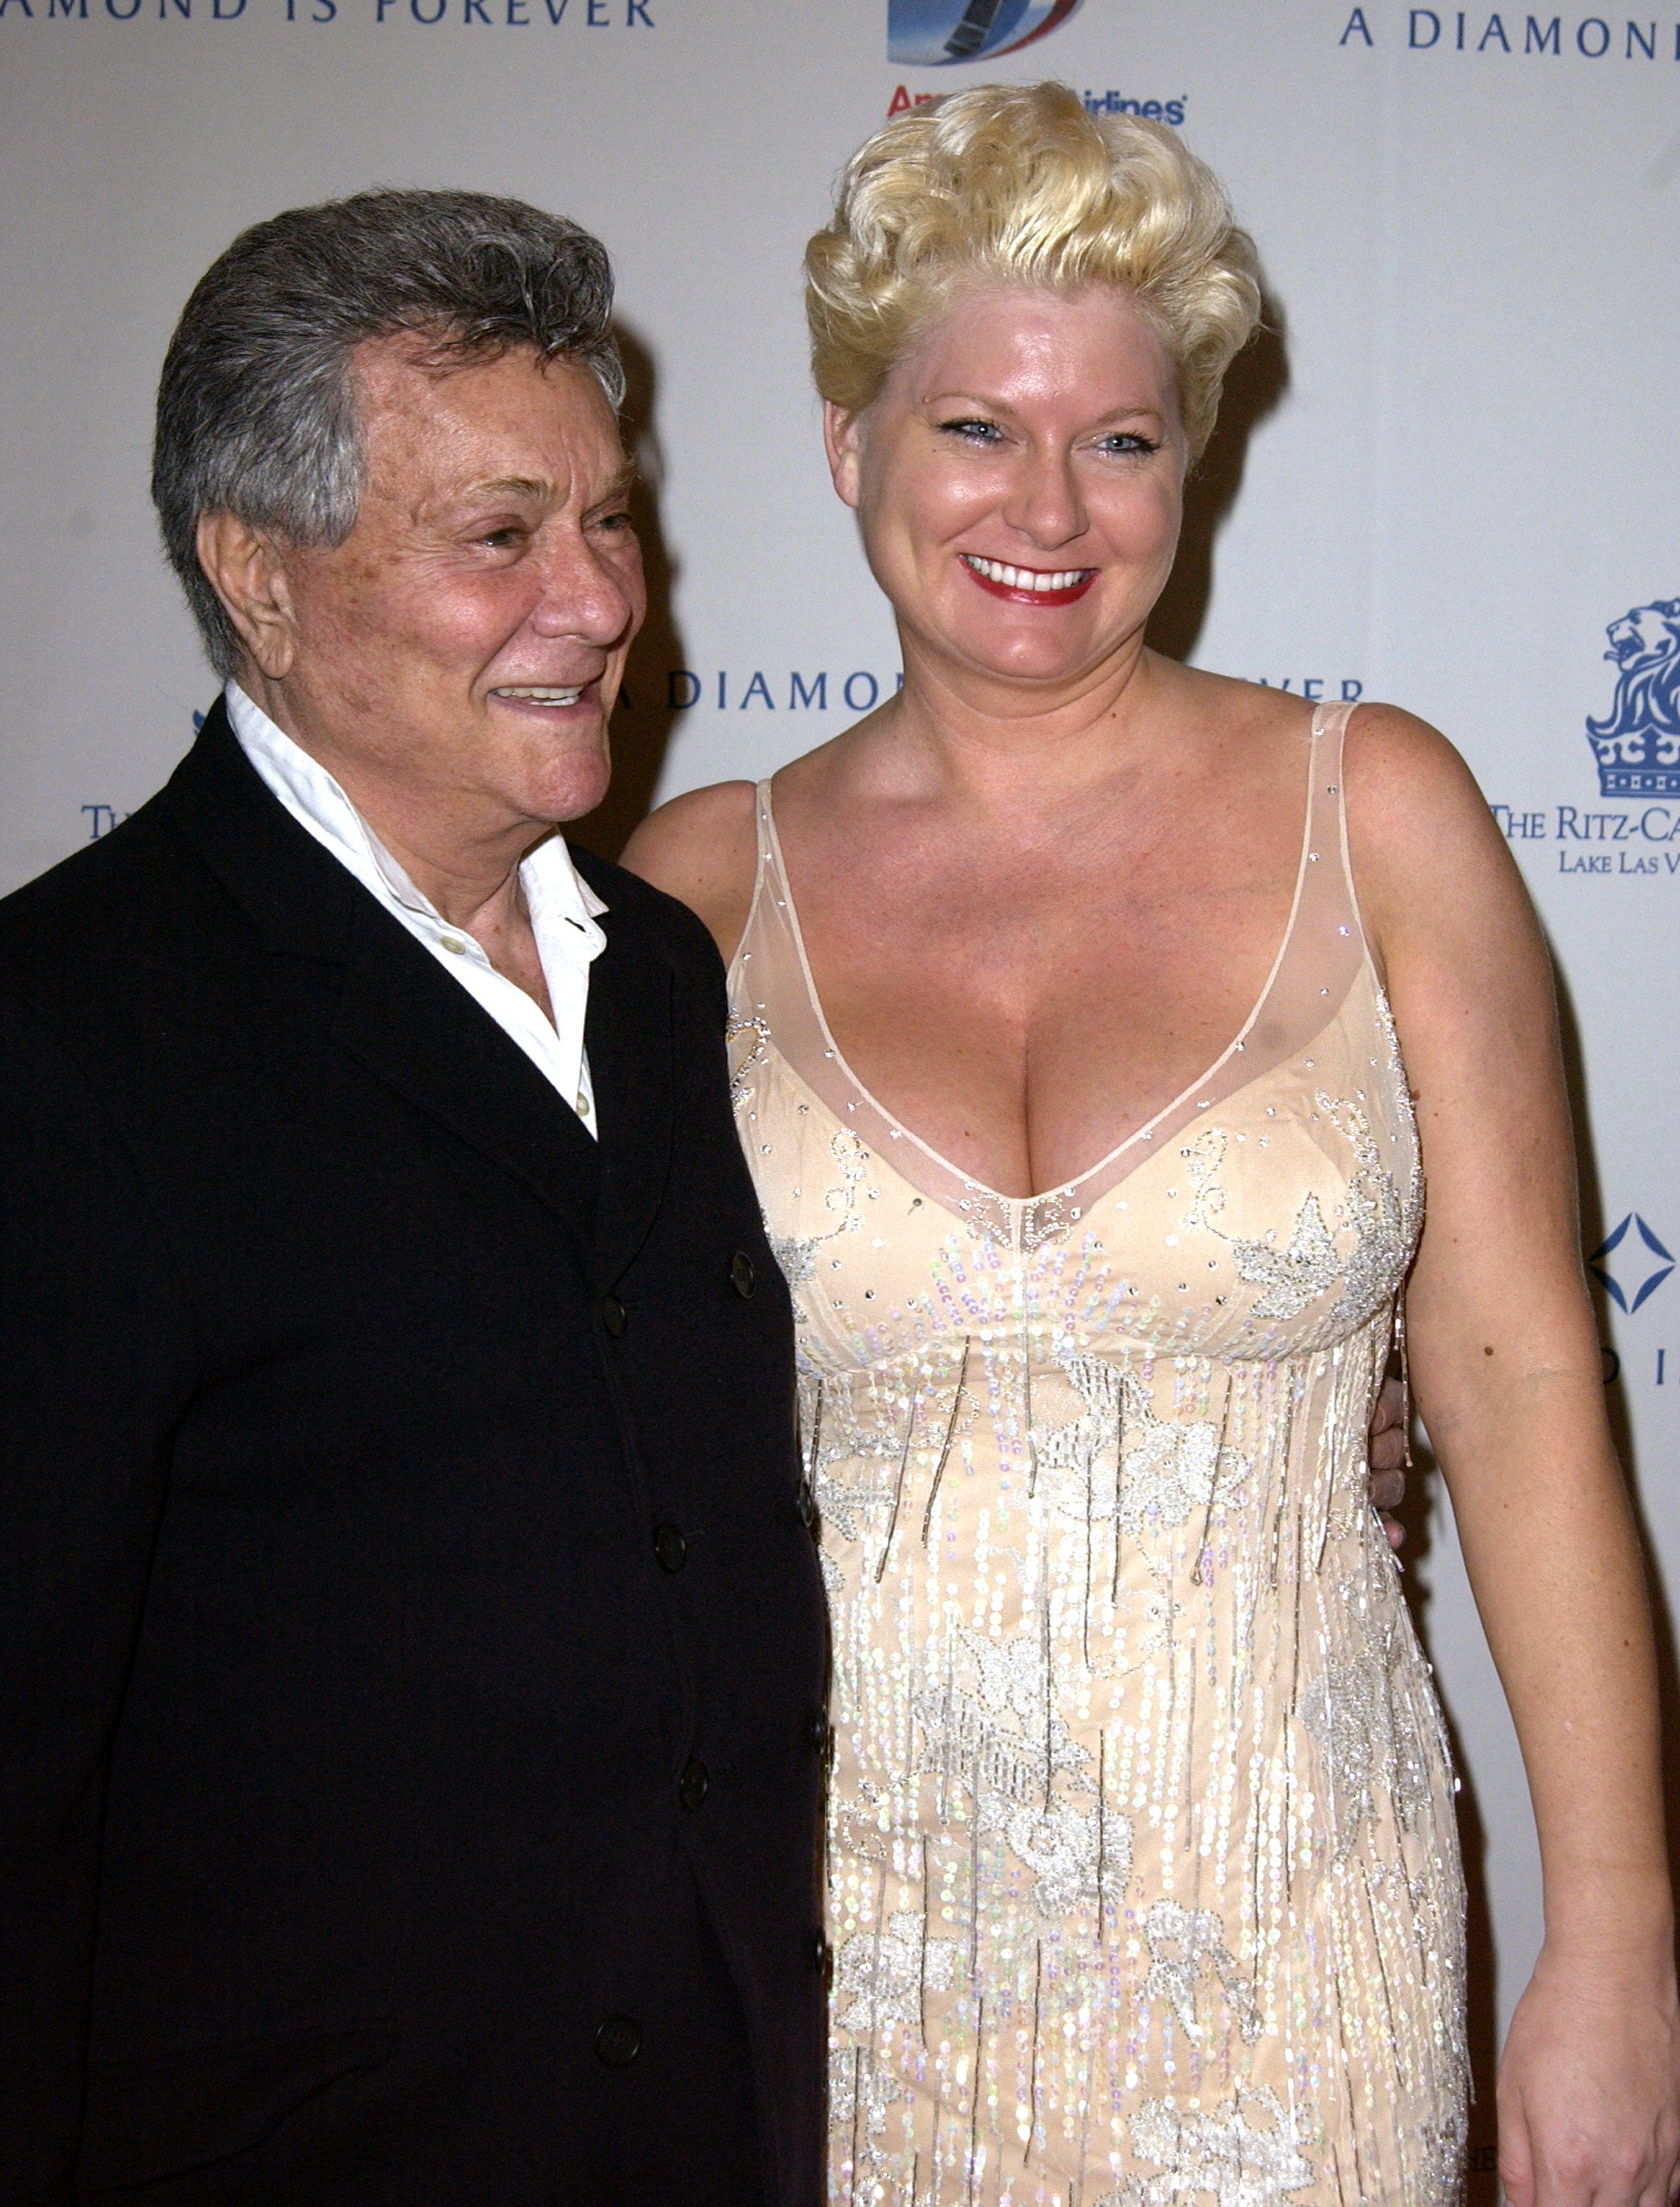 Tony Curtis and Jill Vandenberg during "Diamonds and the Power of Love" Exhibit Opening at Ritz Carlton Lake Las Vegas in Lake Las Vegas, Nevada on February 15, 2003 | Source: Getty Images